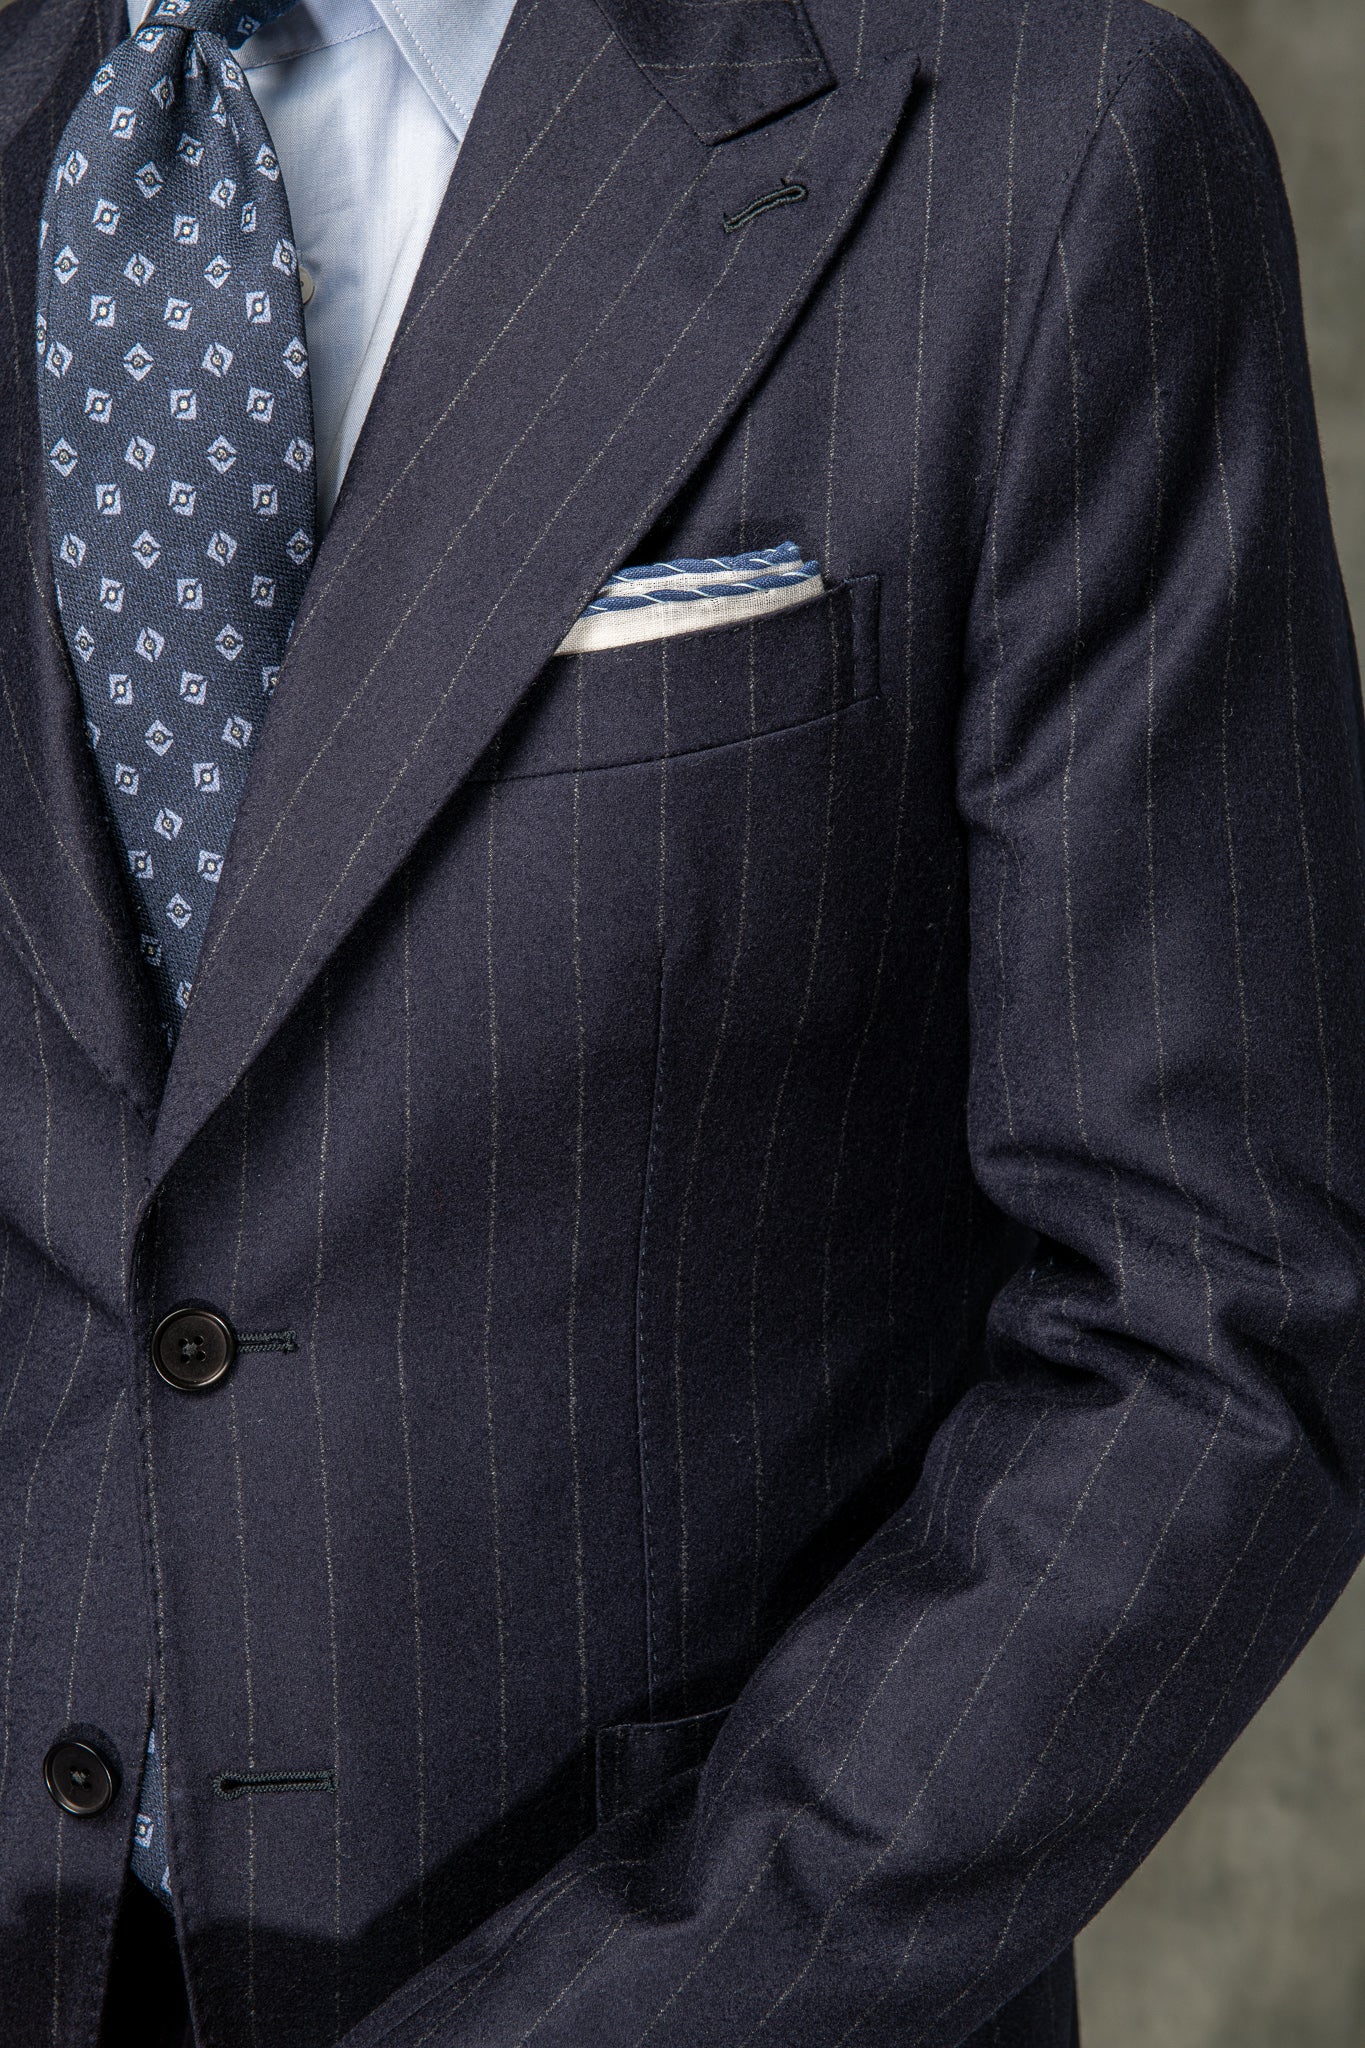 Blue striped suit "Soragna Capsule Collection" - Made in Italy